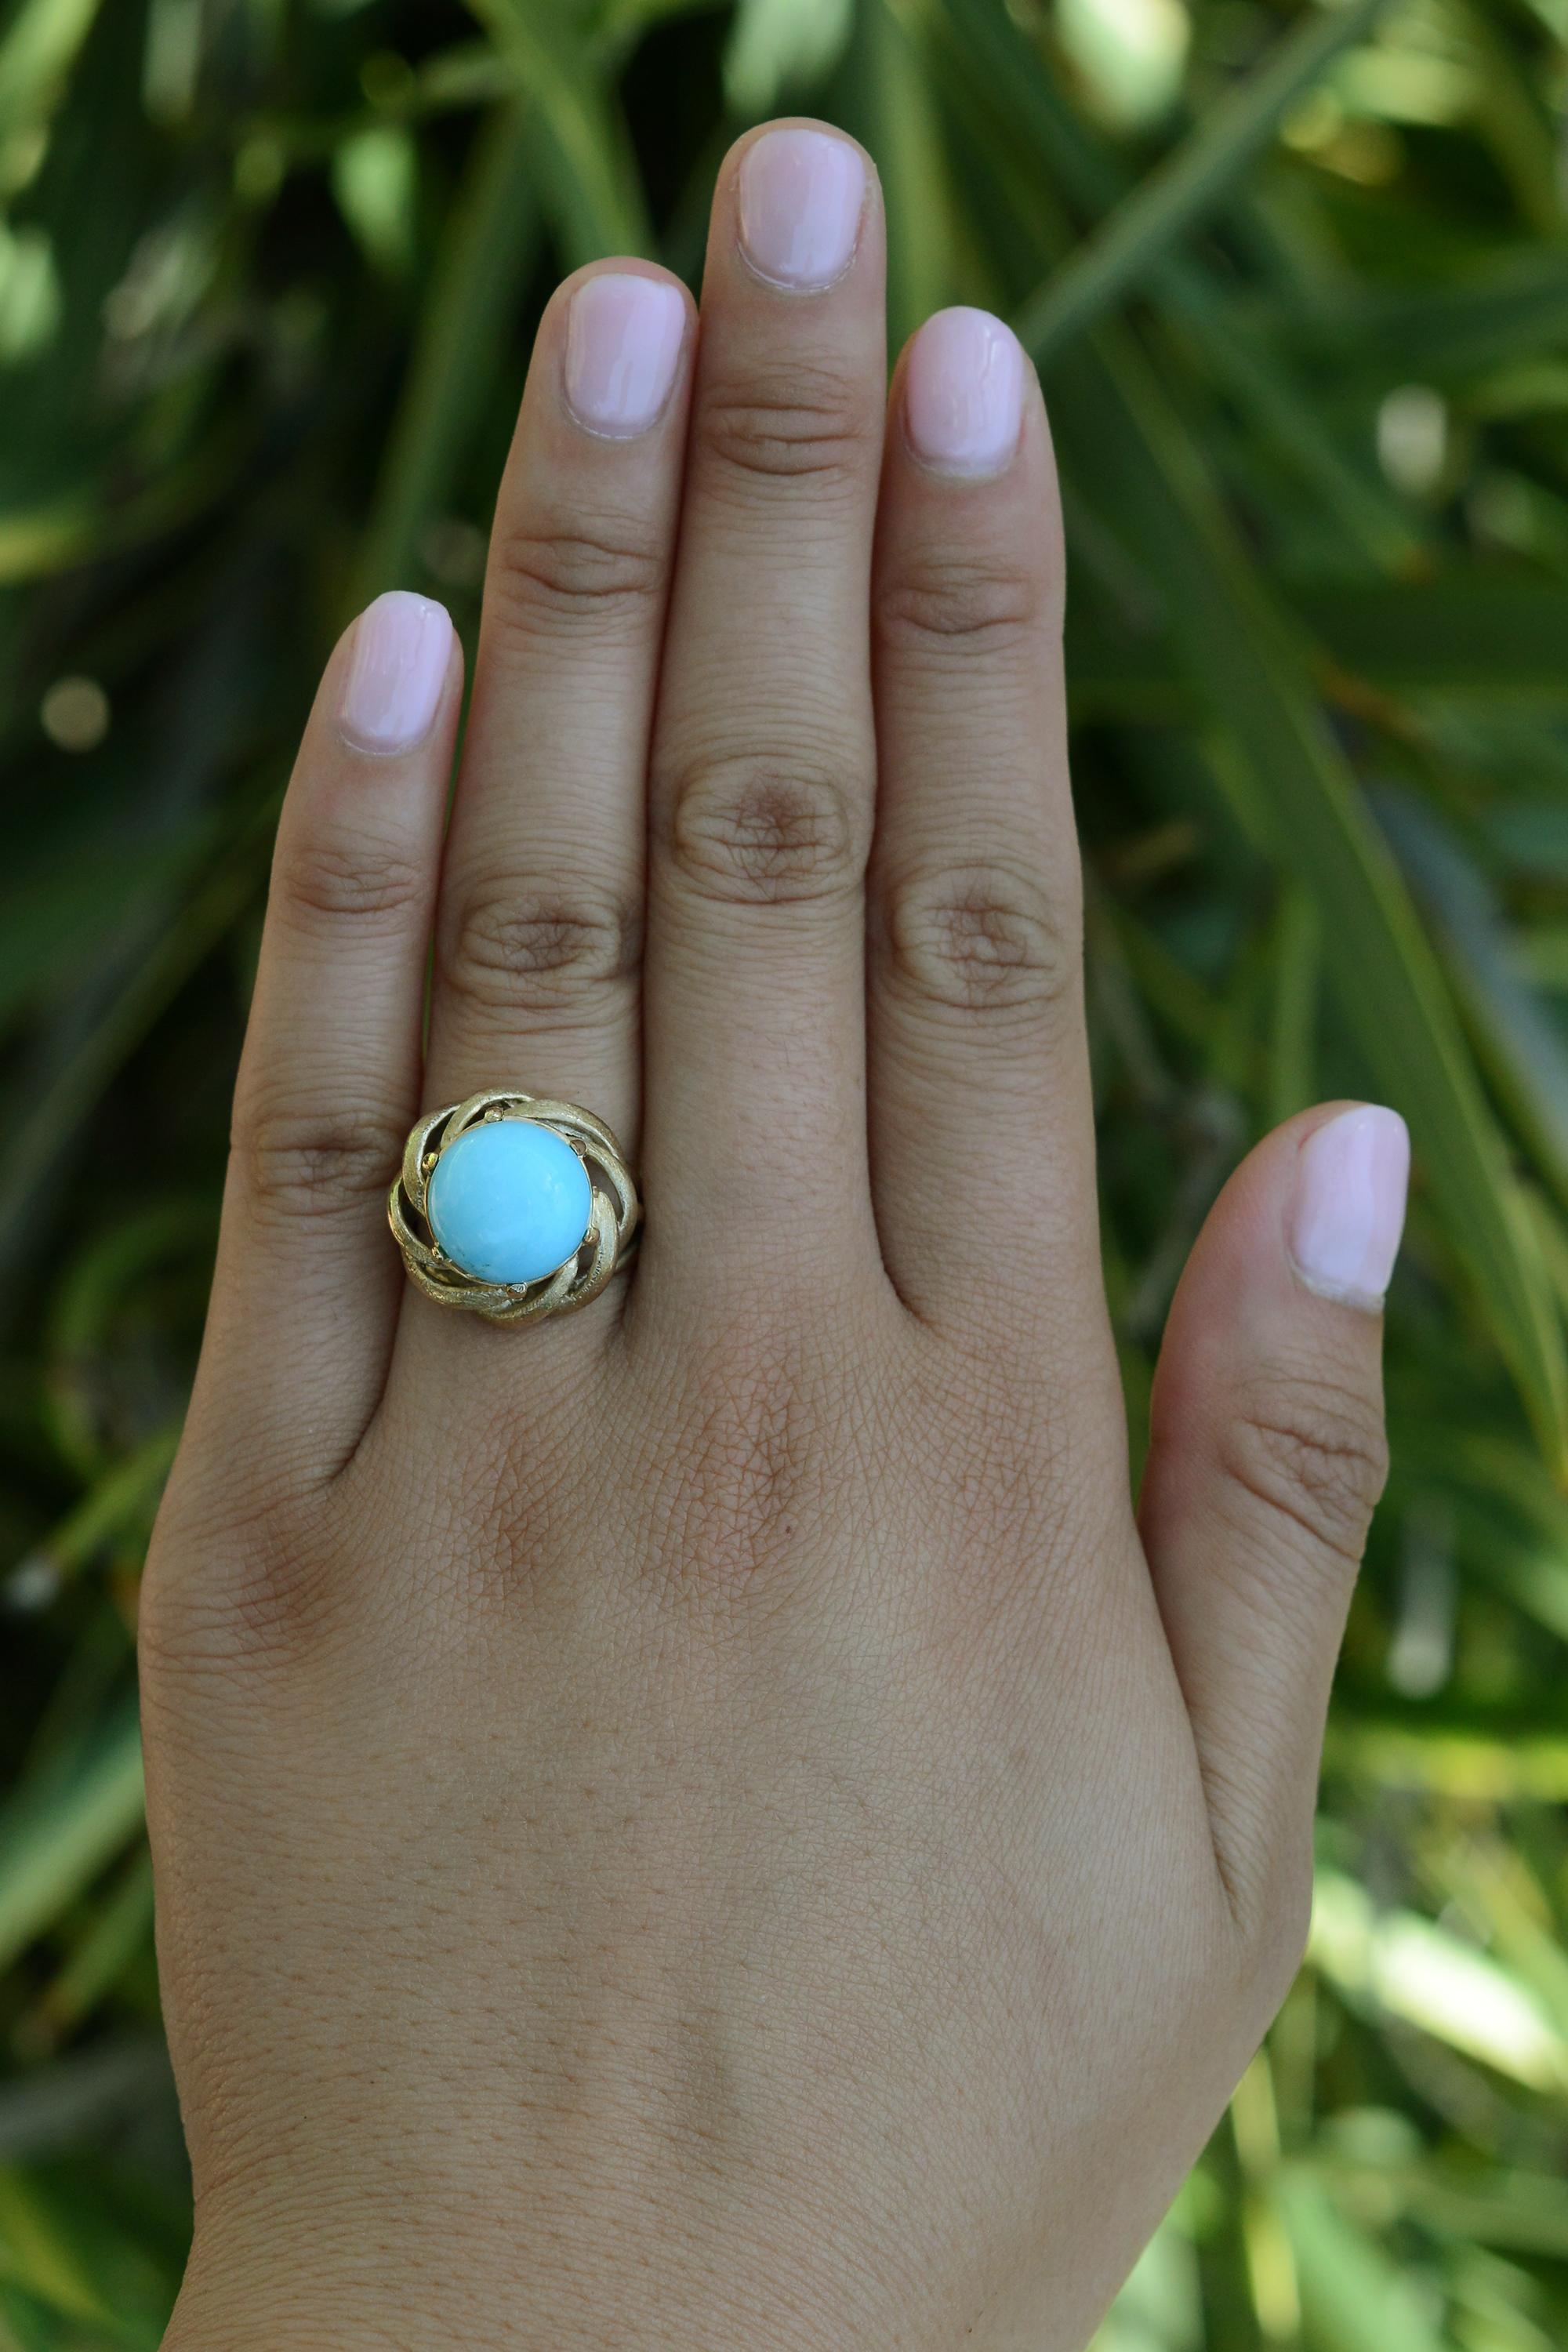 An affordable vintage estate treasure, right out of a fairy tale! This turquoise cocktail ring displays vibrant hues and excellent symmetry. Known for it's pure color, a 5.76 carat Arizona sleeping beauty turquoise gemstone is proudly set in a